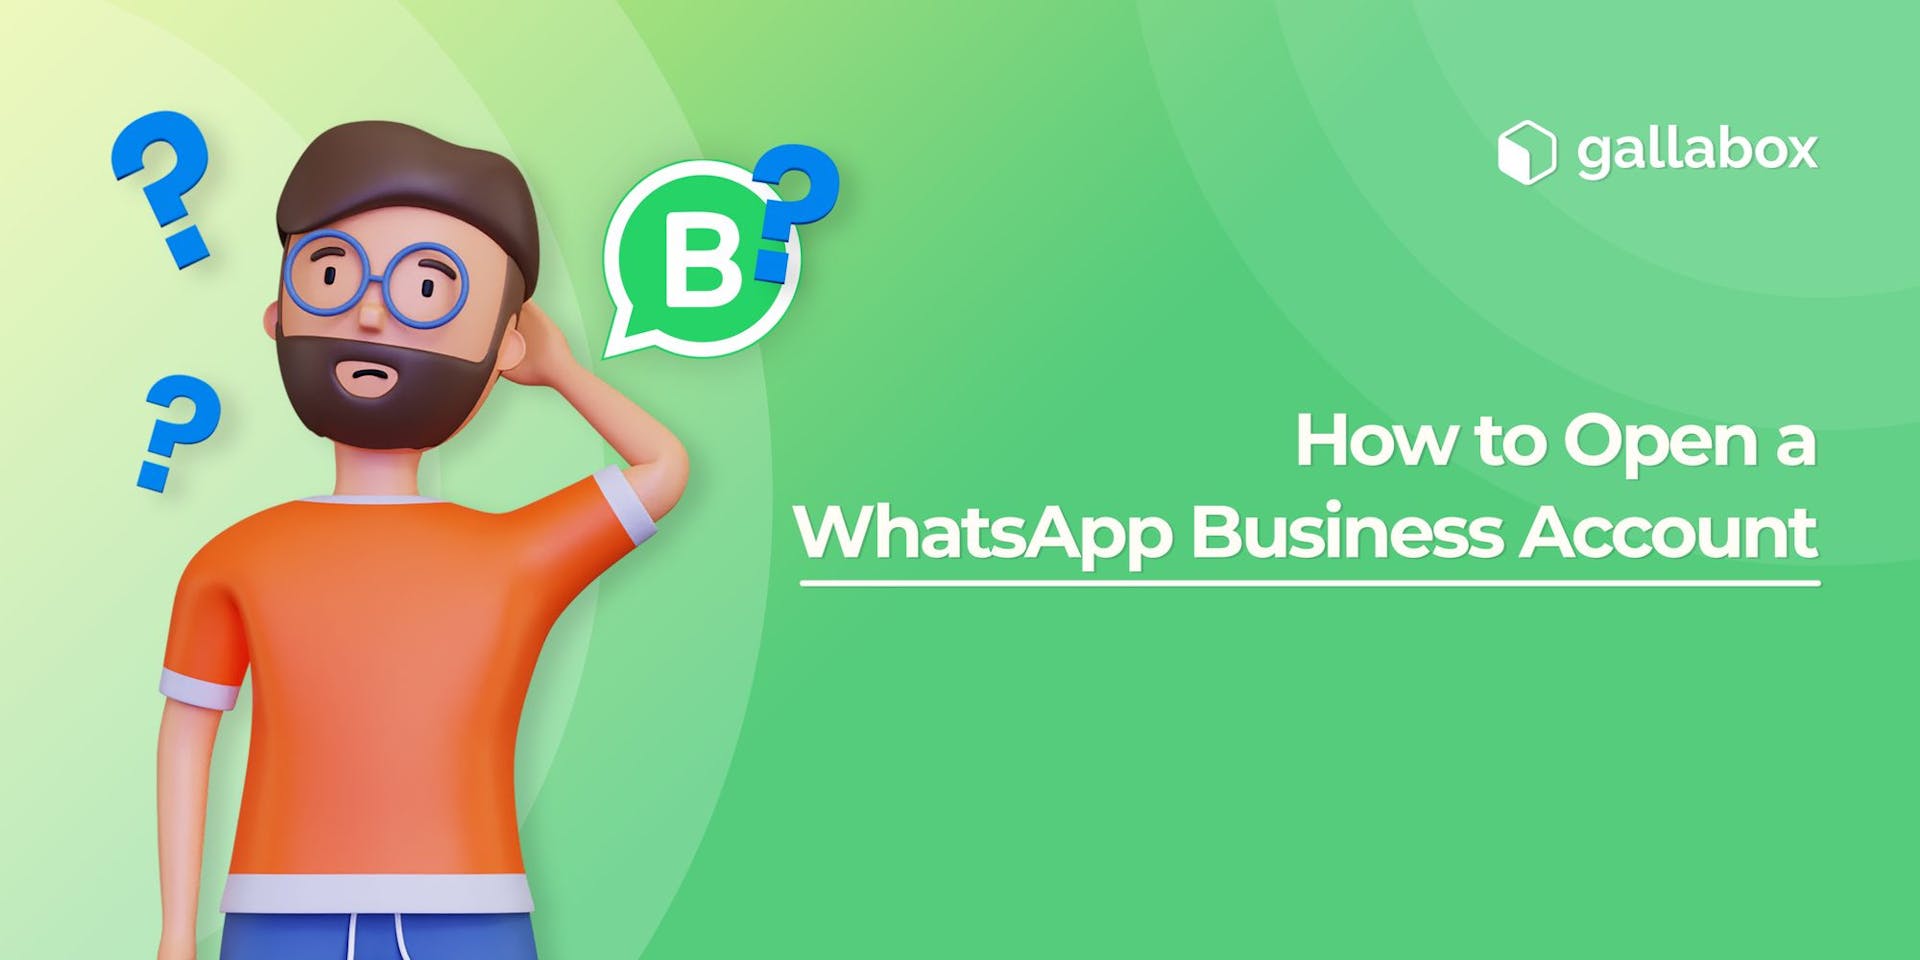 How to Open a WhatsApp Business Account: A Step-by-Step Guide